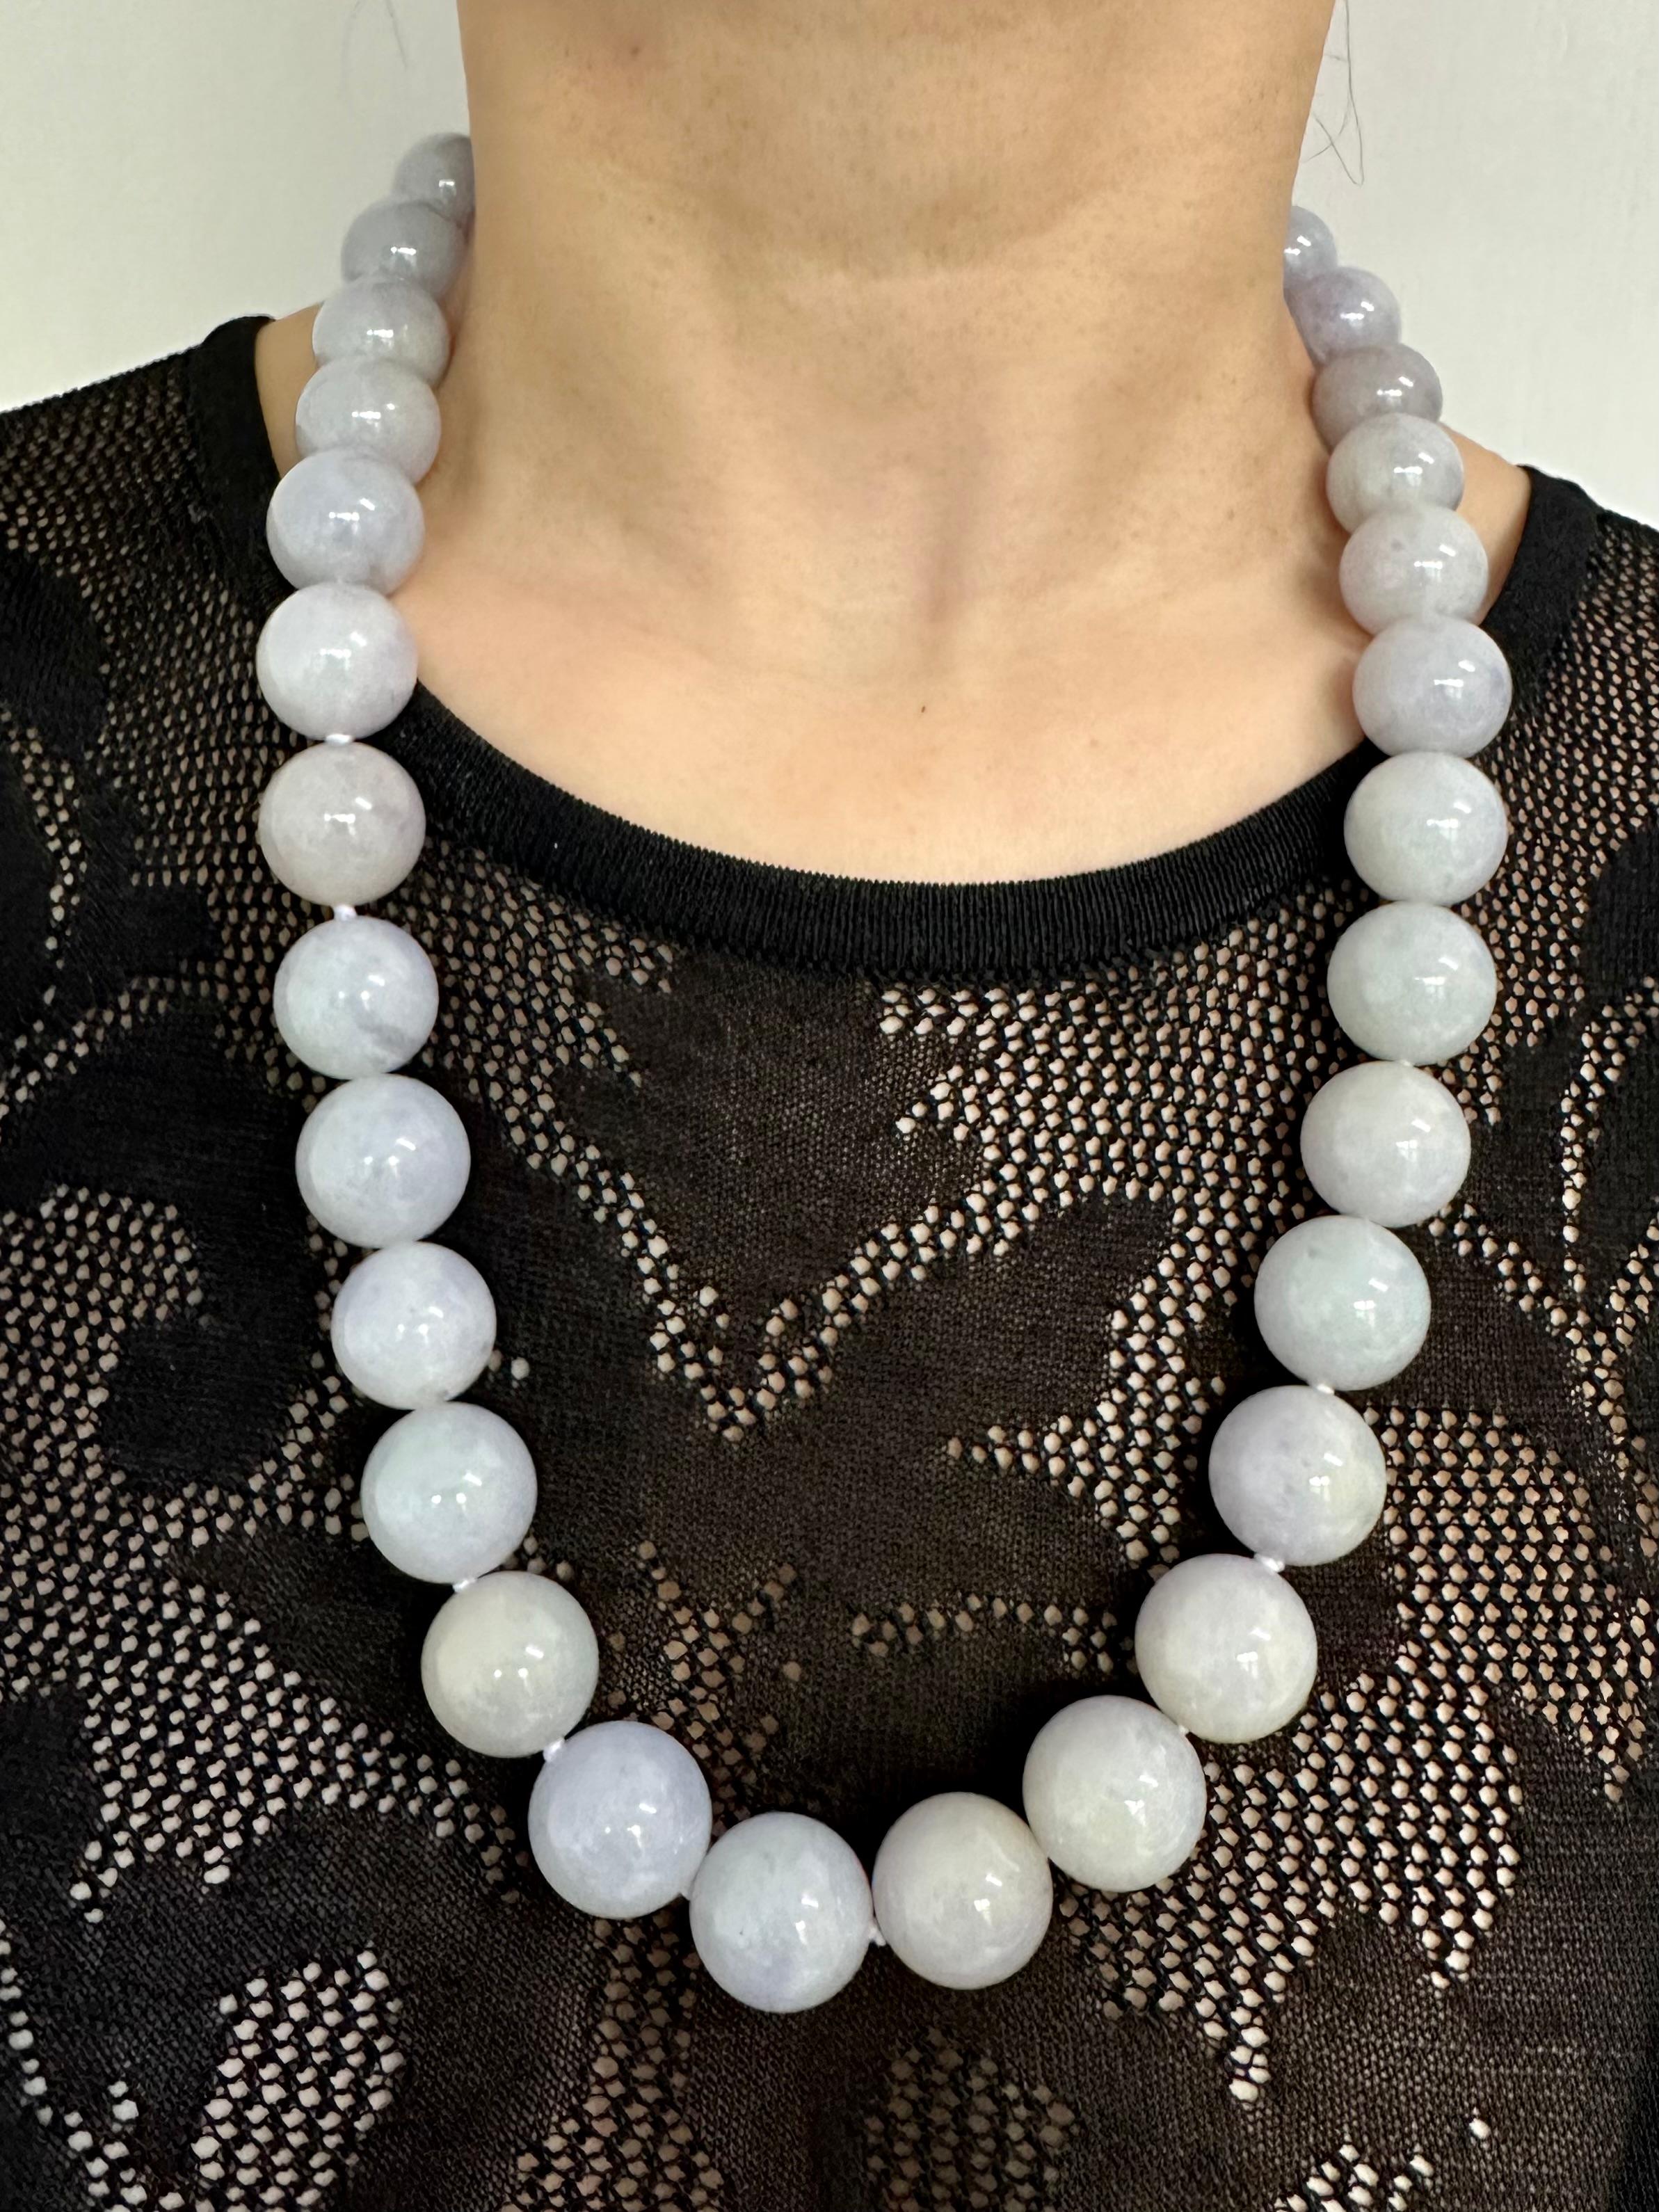 Please check out the HD video! For your consideration is an important natural light lavender XXL jade bead necklace with a custom Burma rubies (with high fluorescence) and diamonds disco ball clasp. Natural light Lavender and light green jade beads